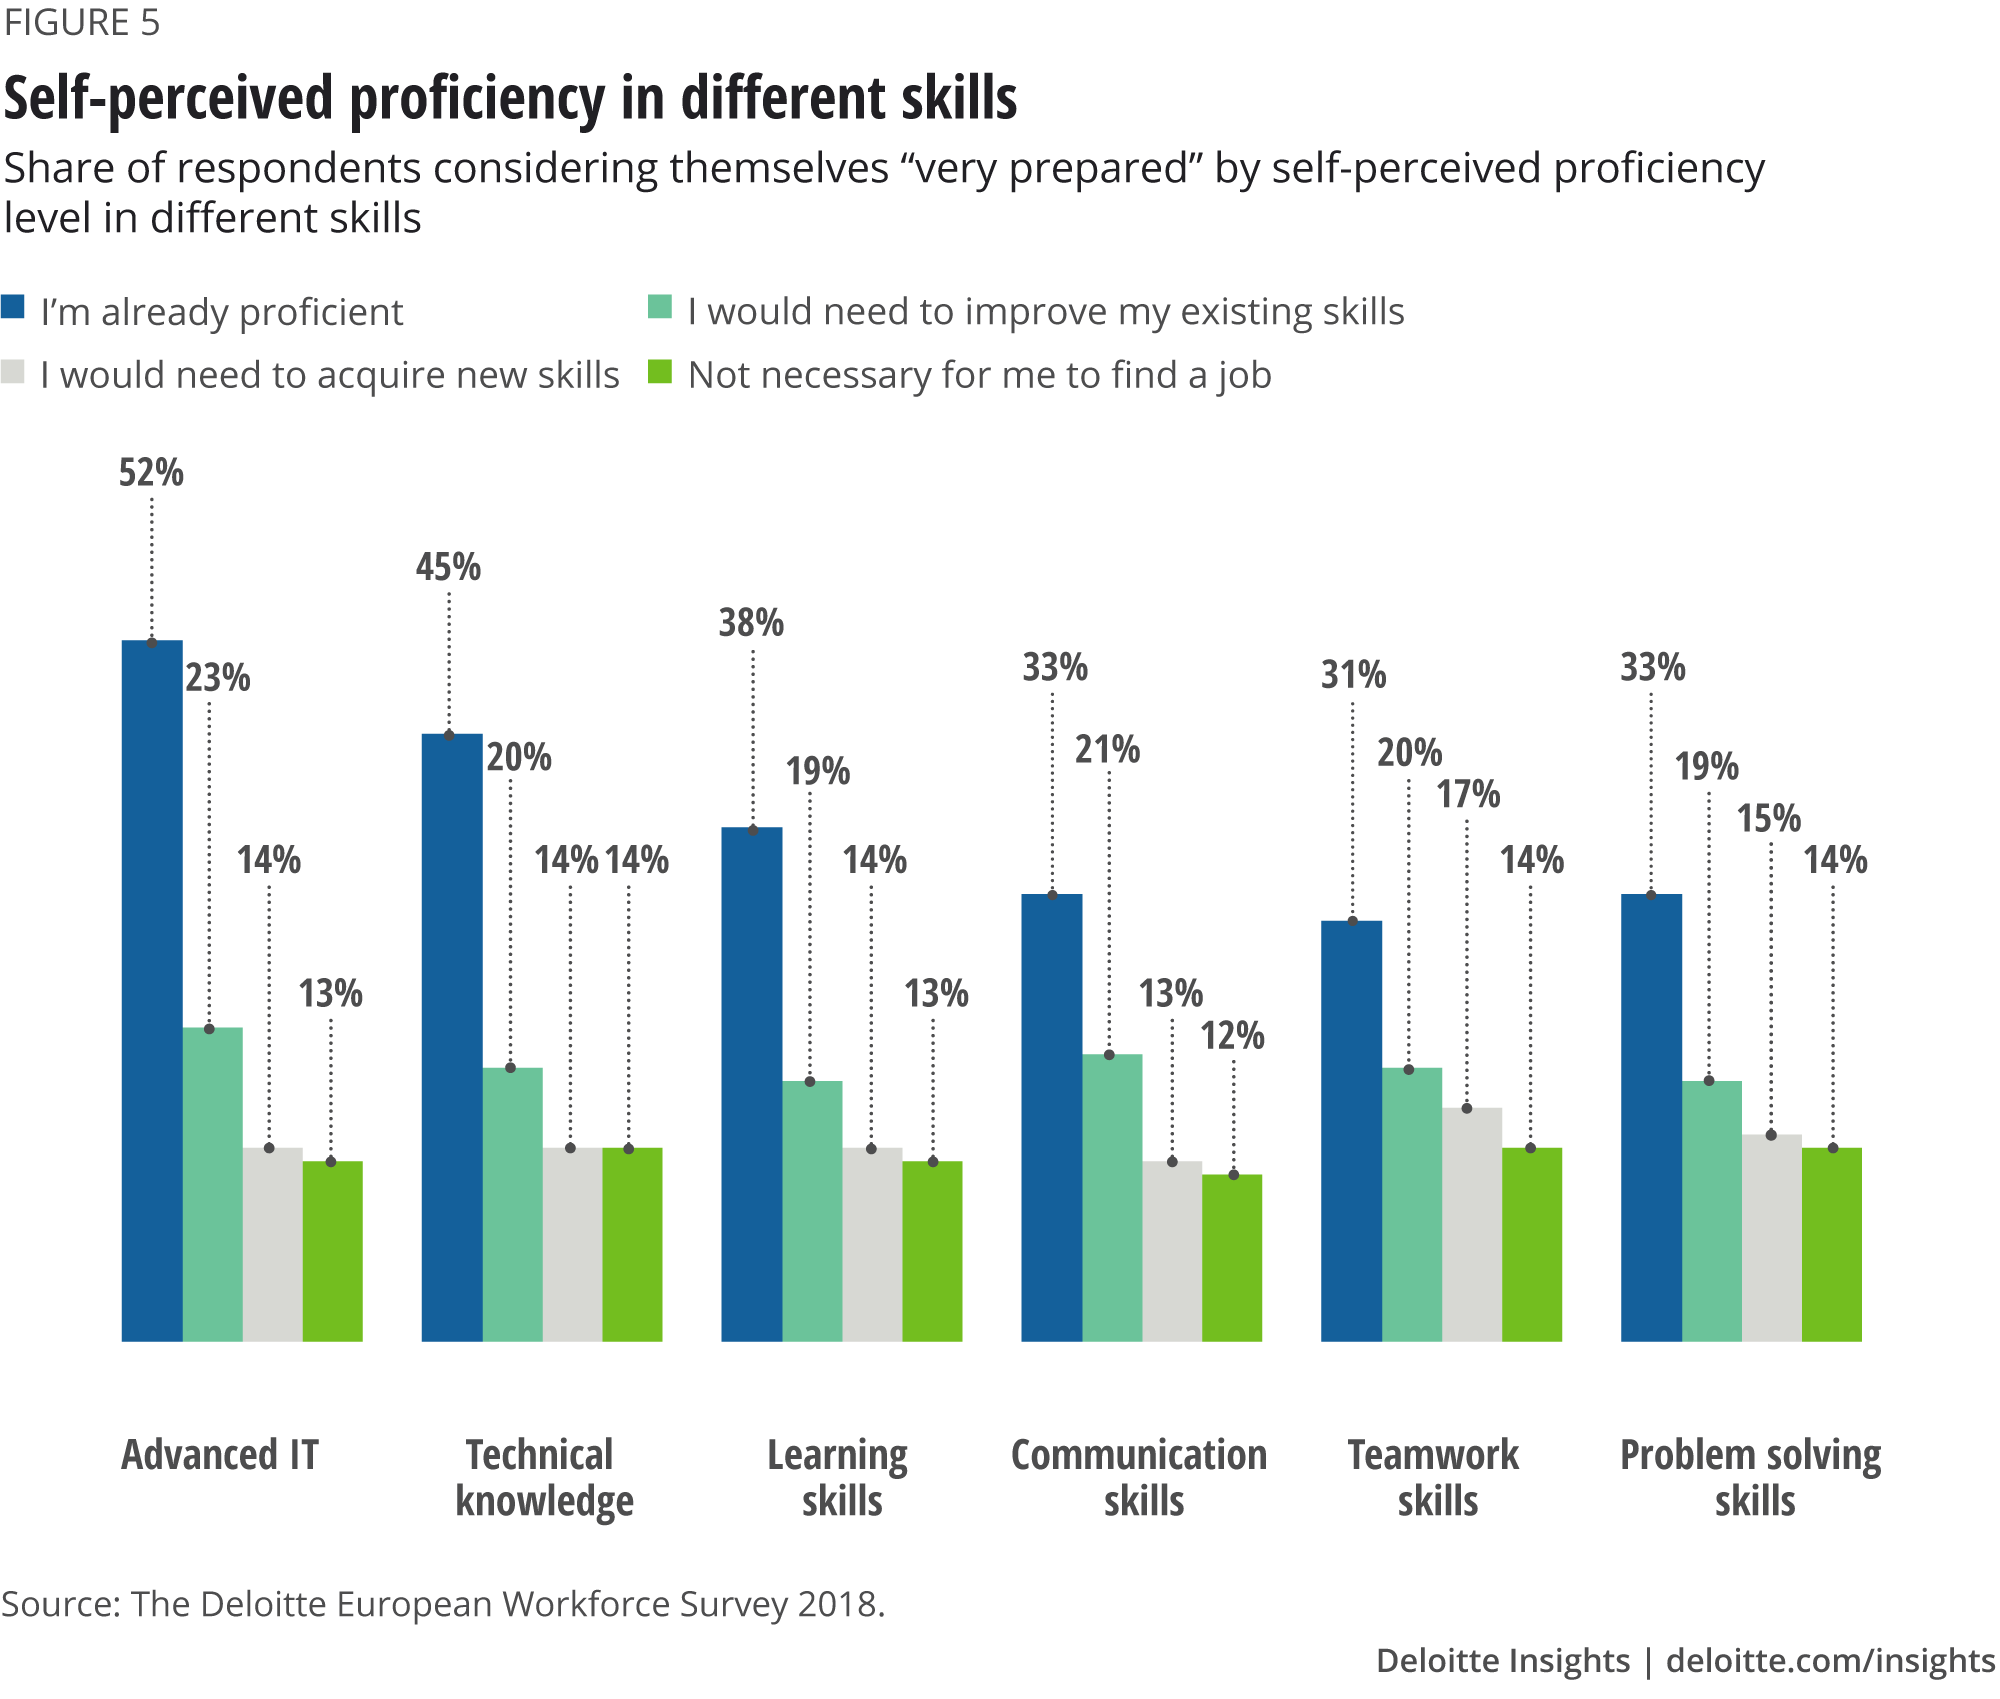 Self-perceived proficiency in different skills